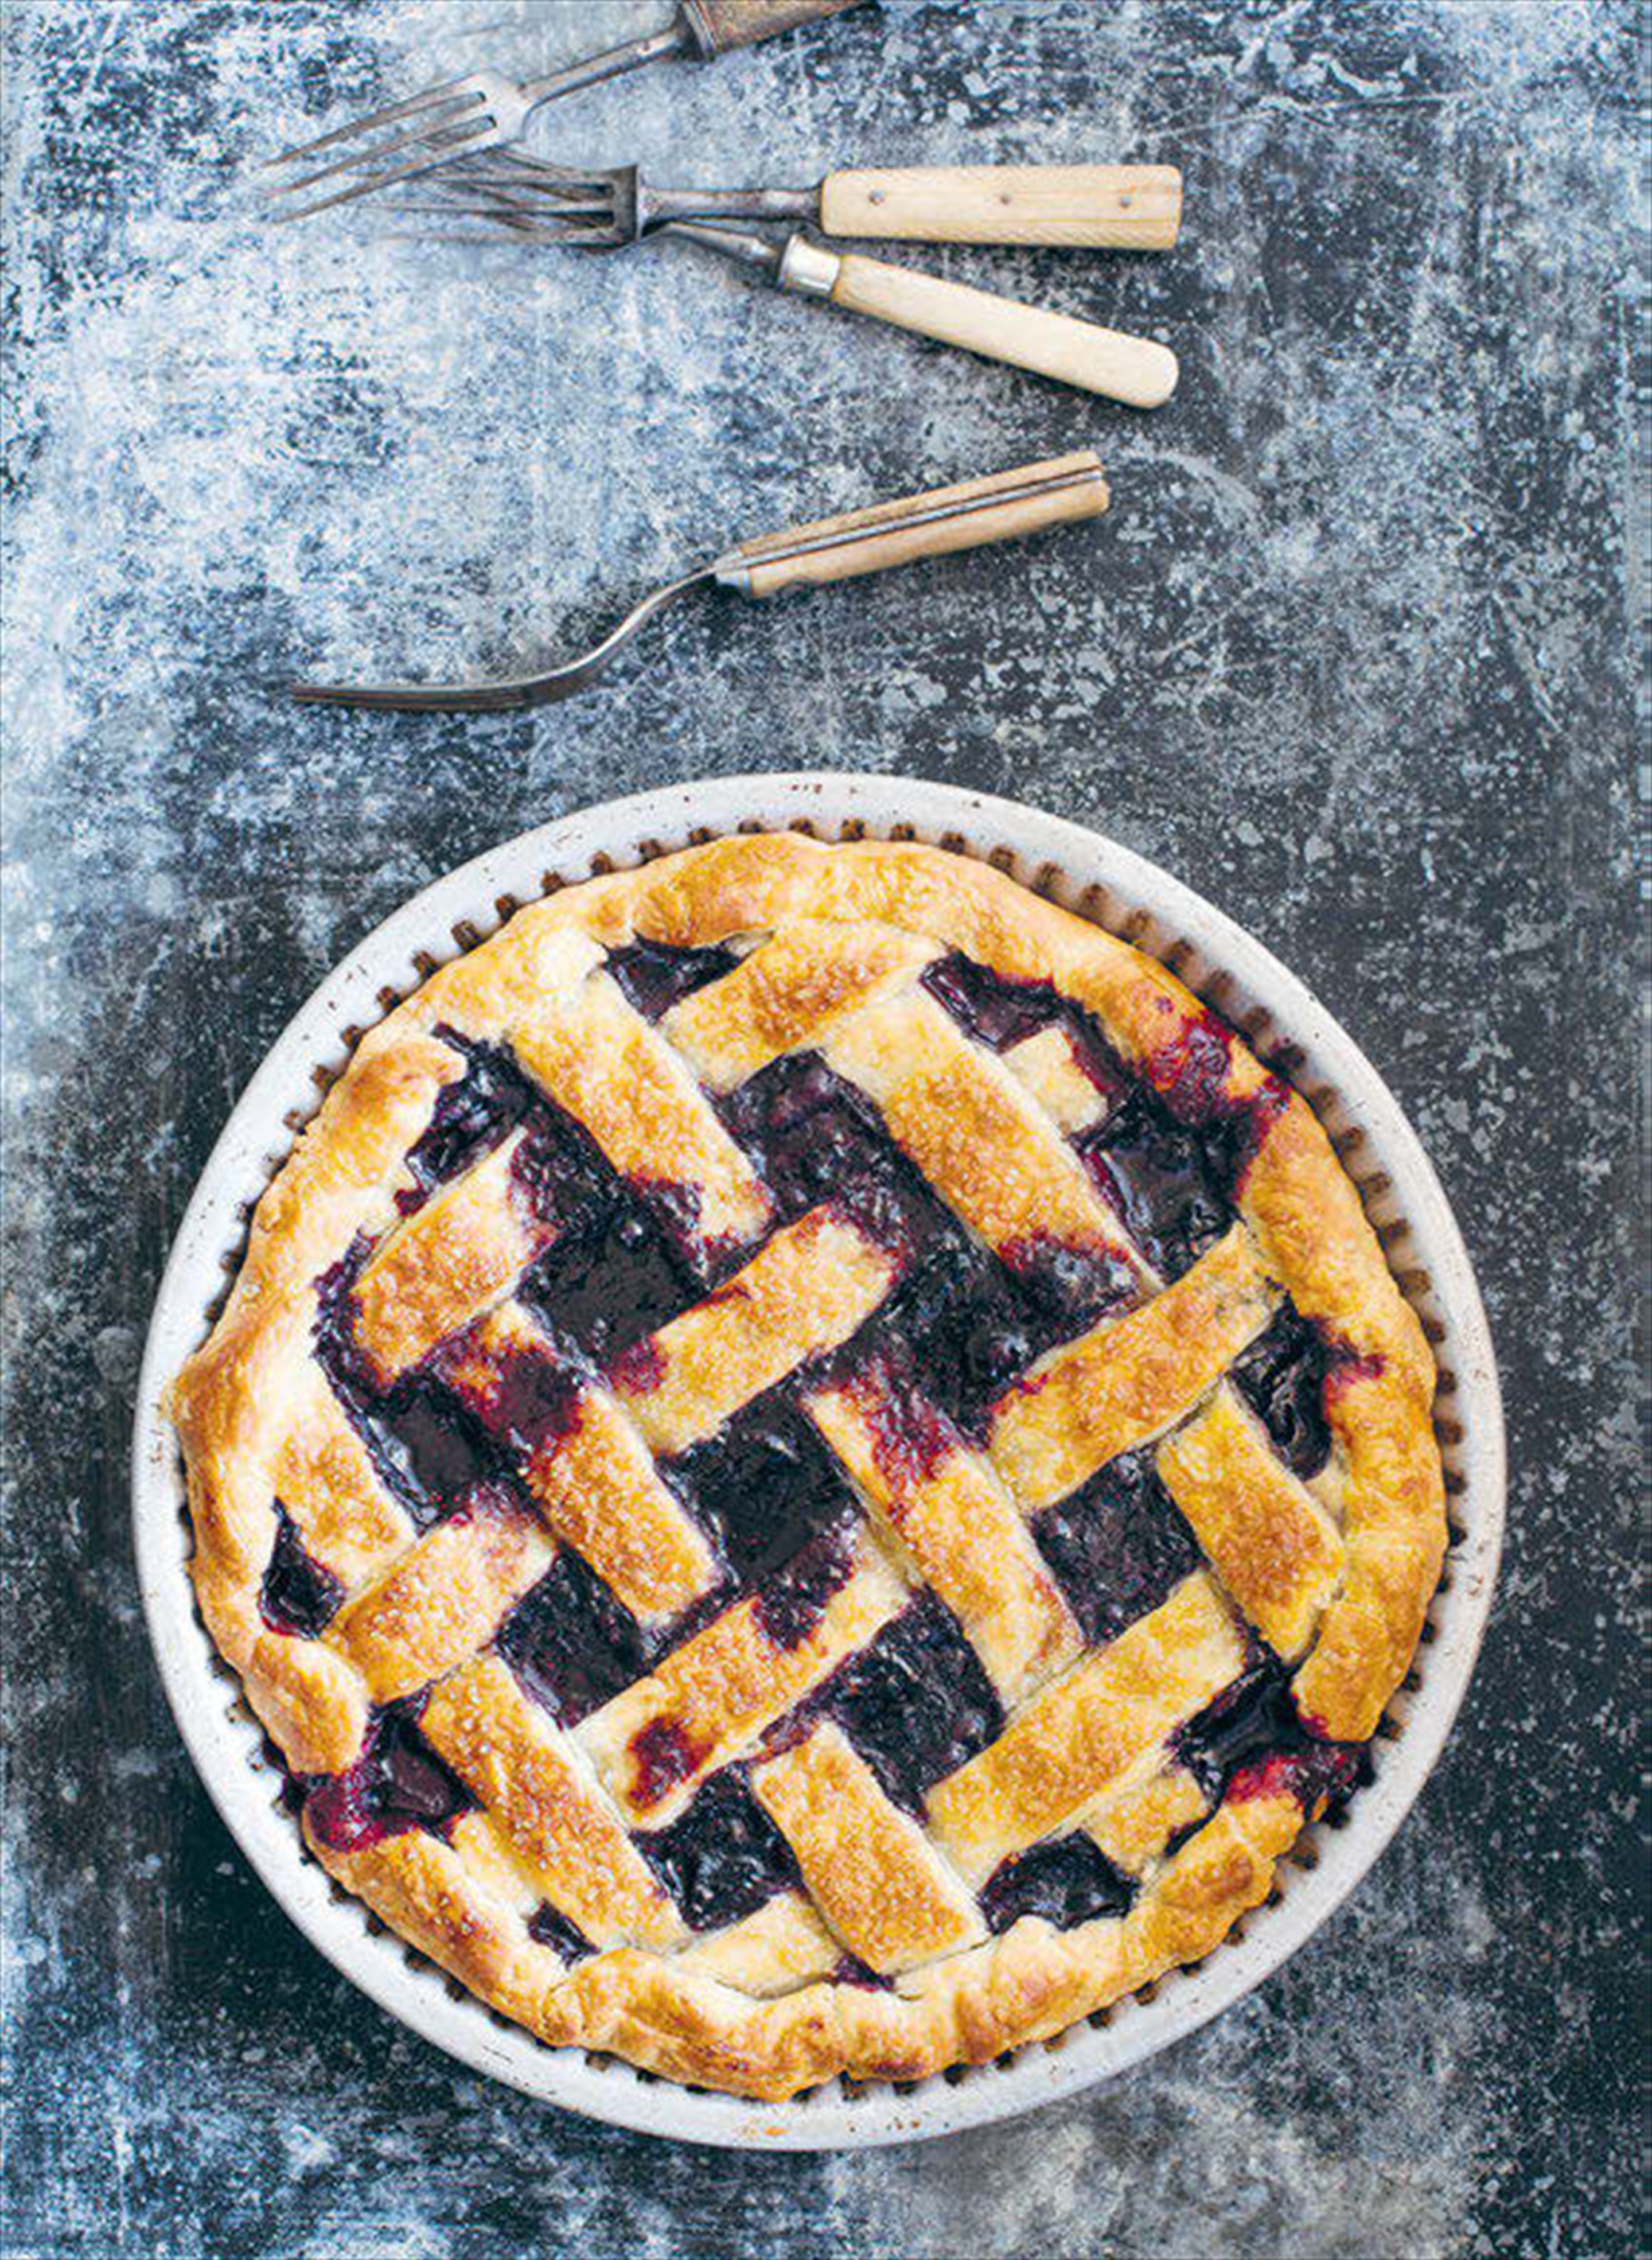 Blueberry, pear and lemon pie